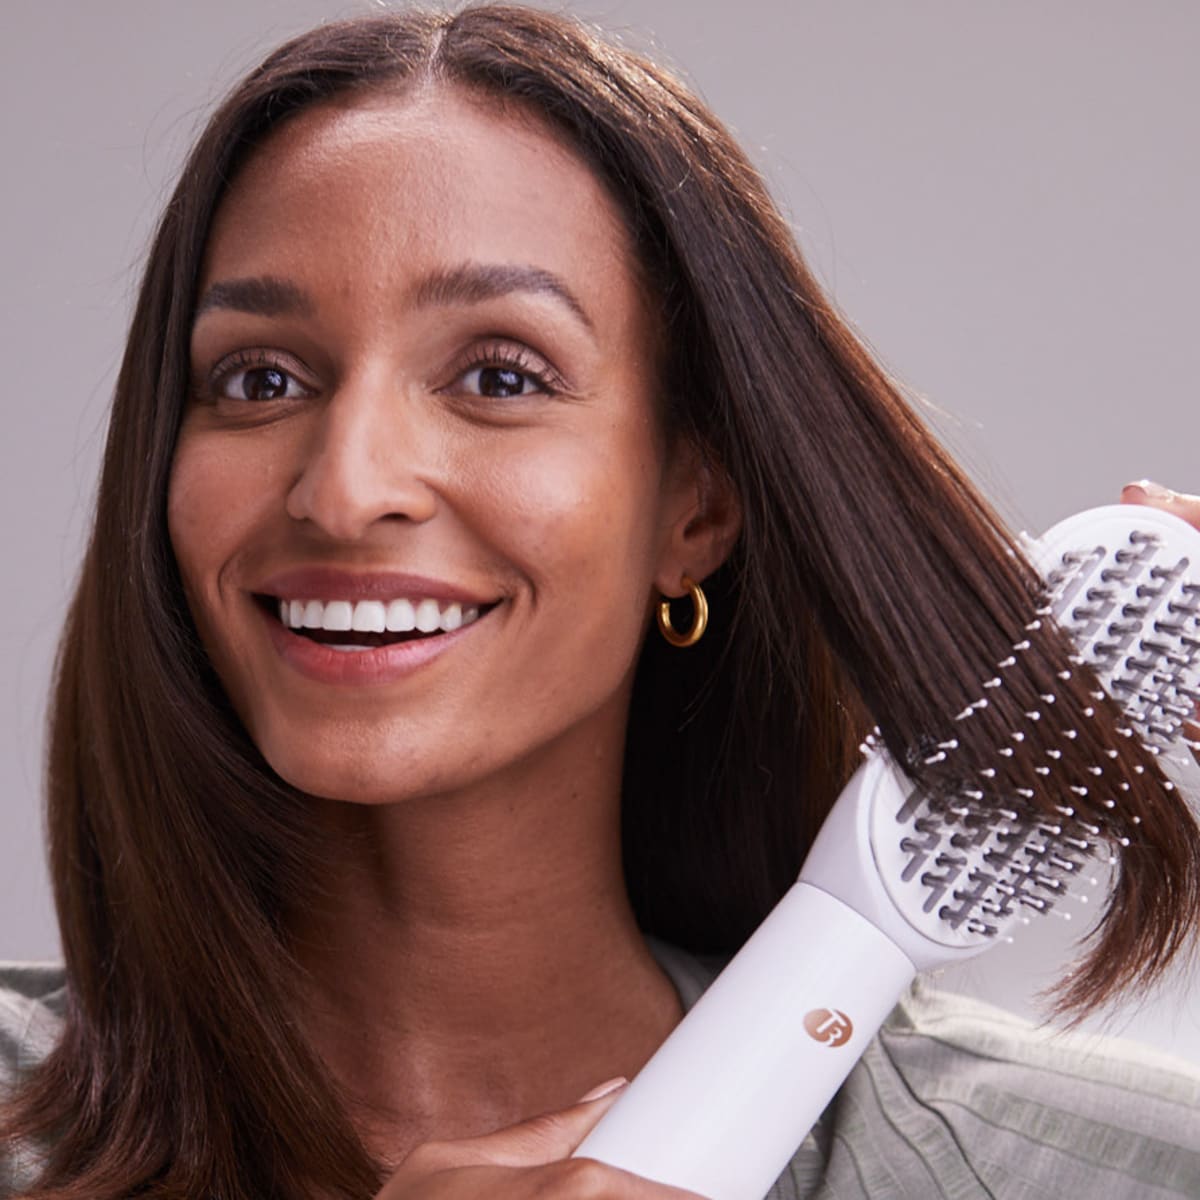 11 Blow-Dryer Brushes That Make Hairstyling So Much Easier - Fashionista